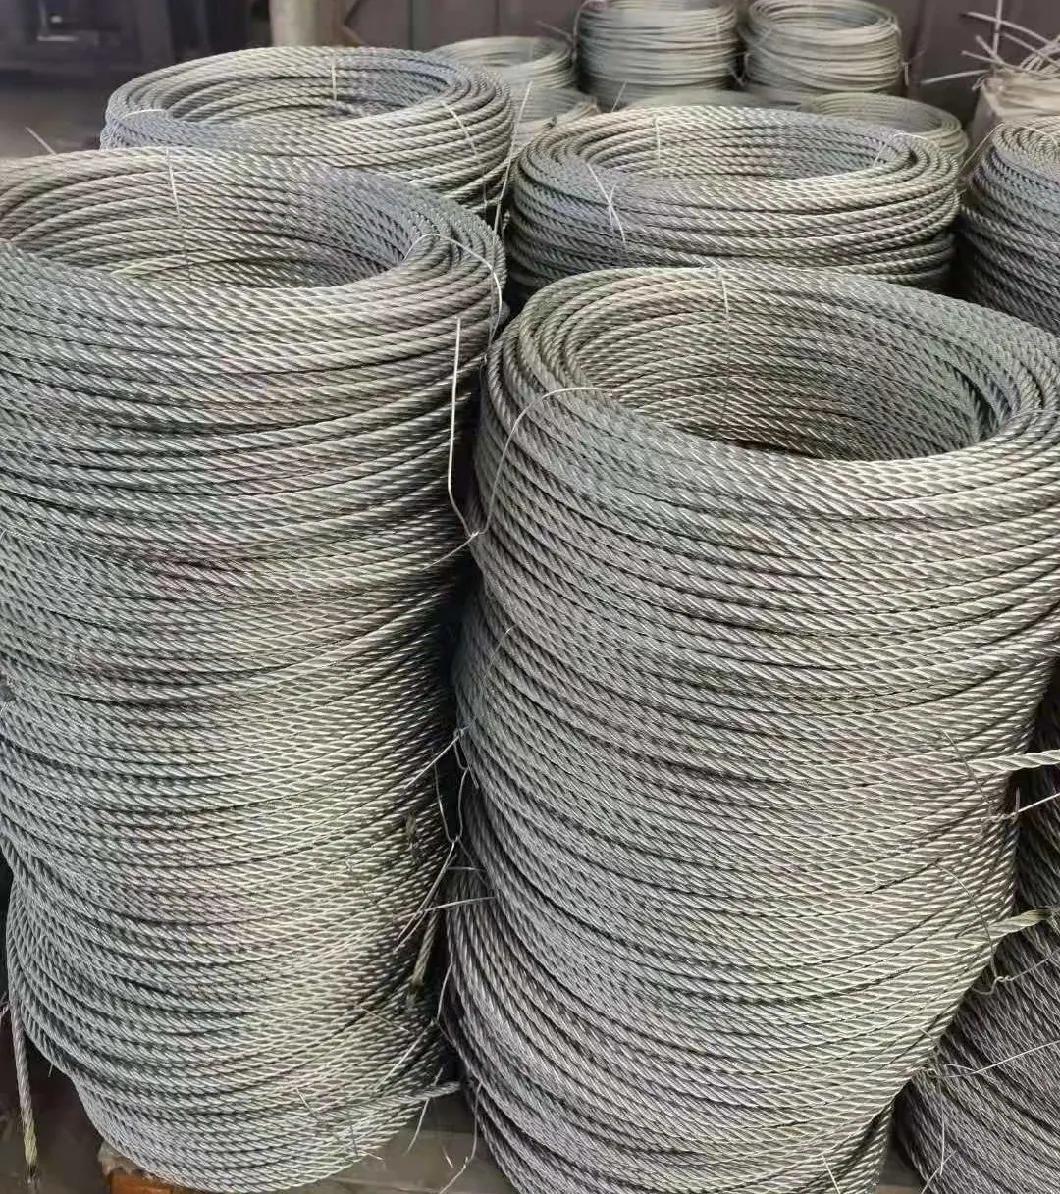 28mm Galvanized Steel Wire Rope with Manufacturer Price